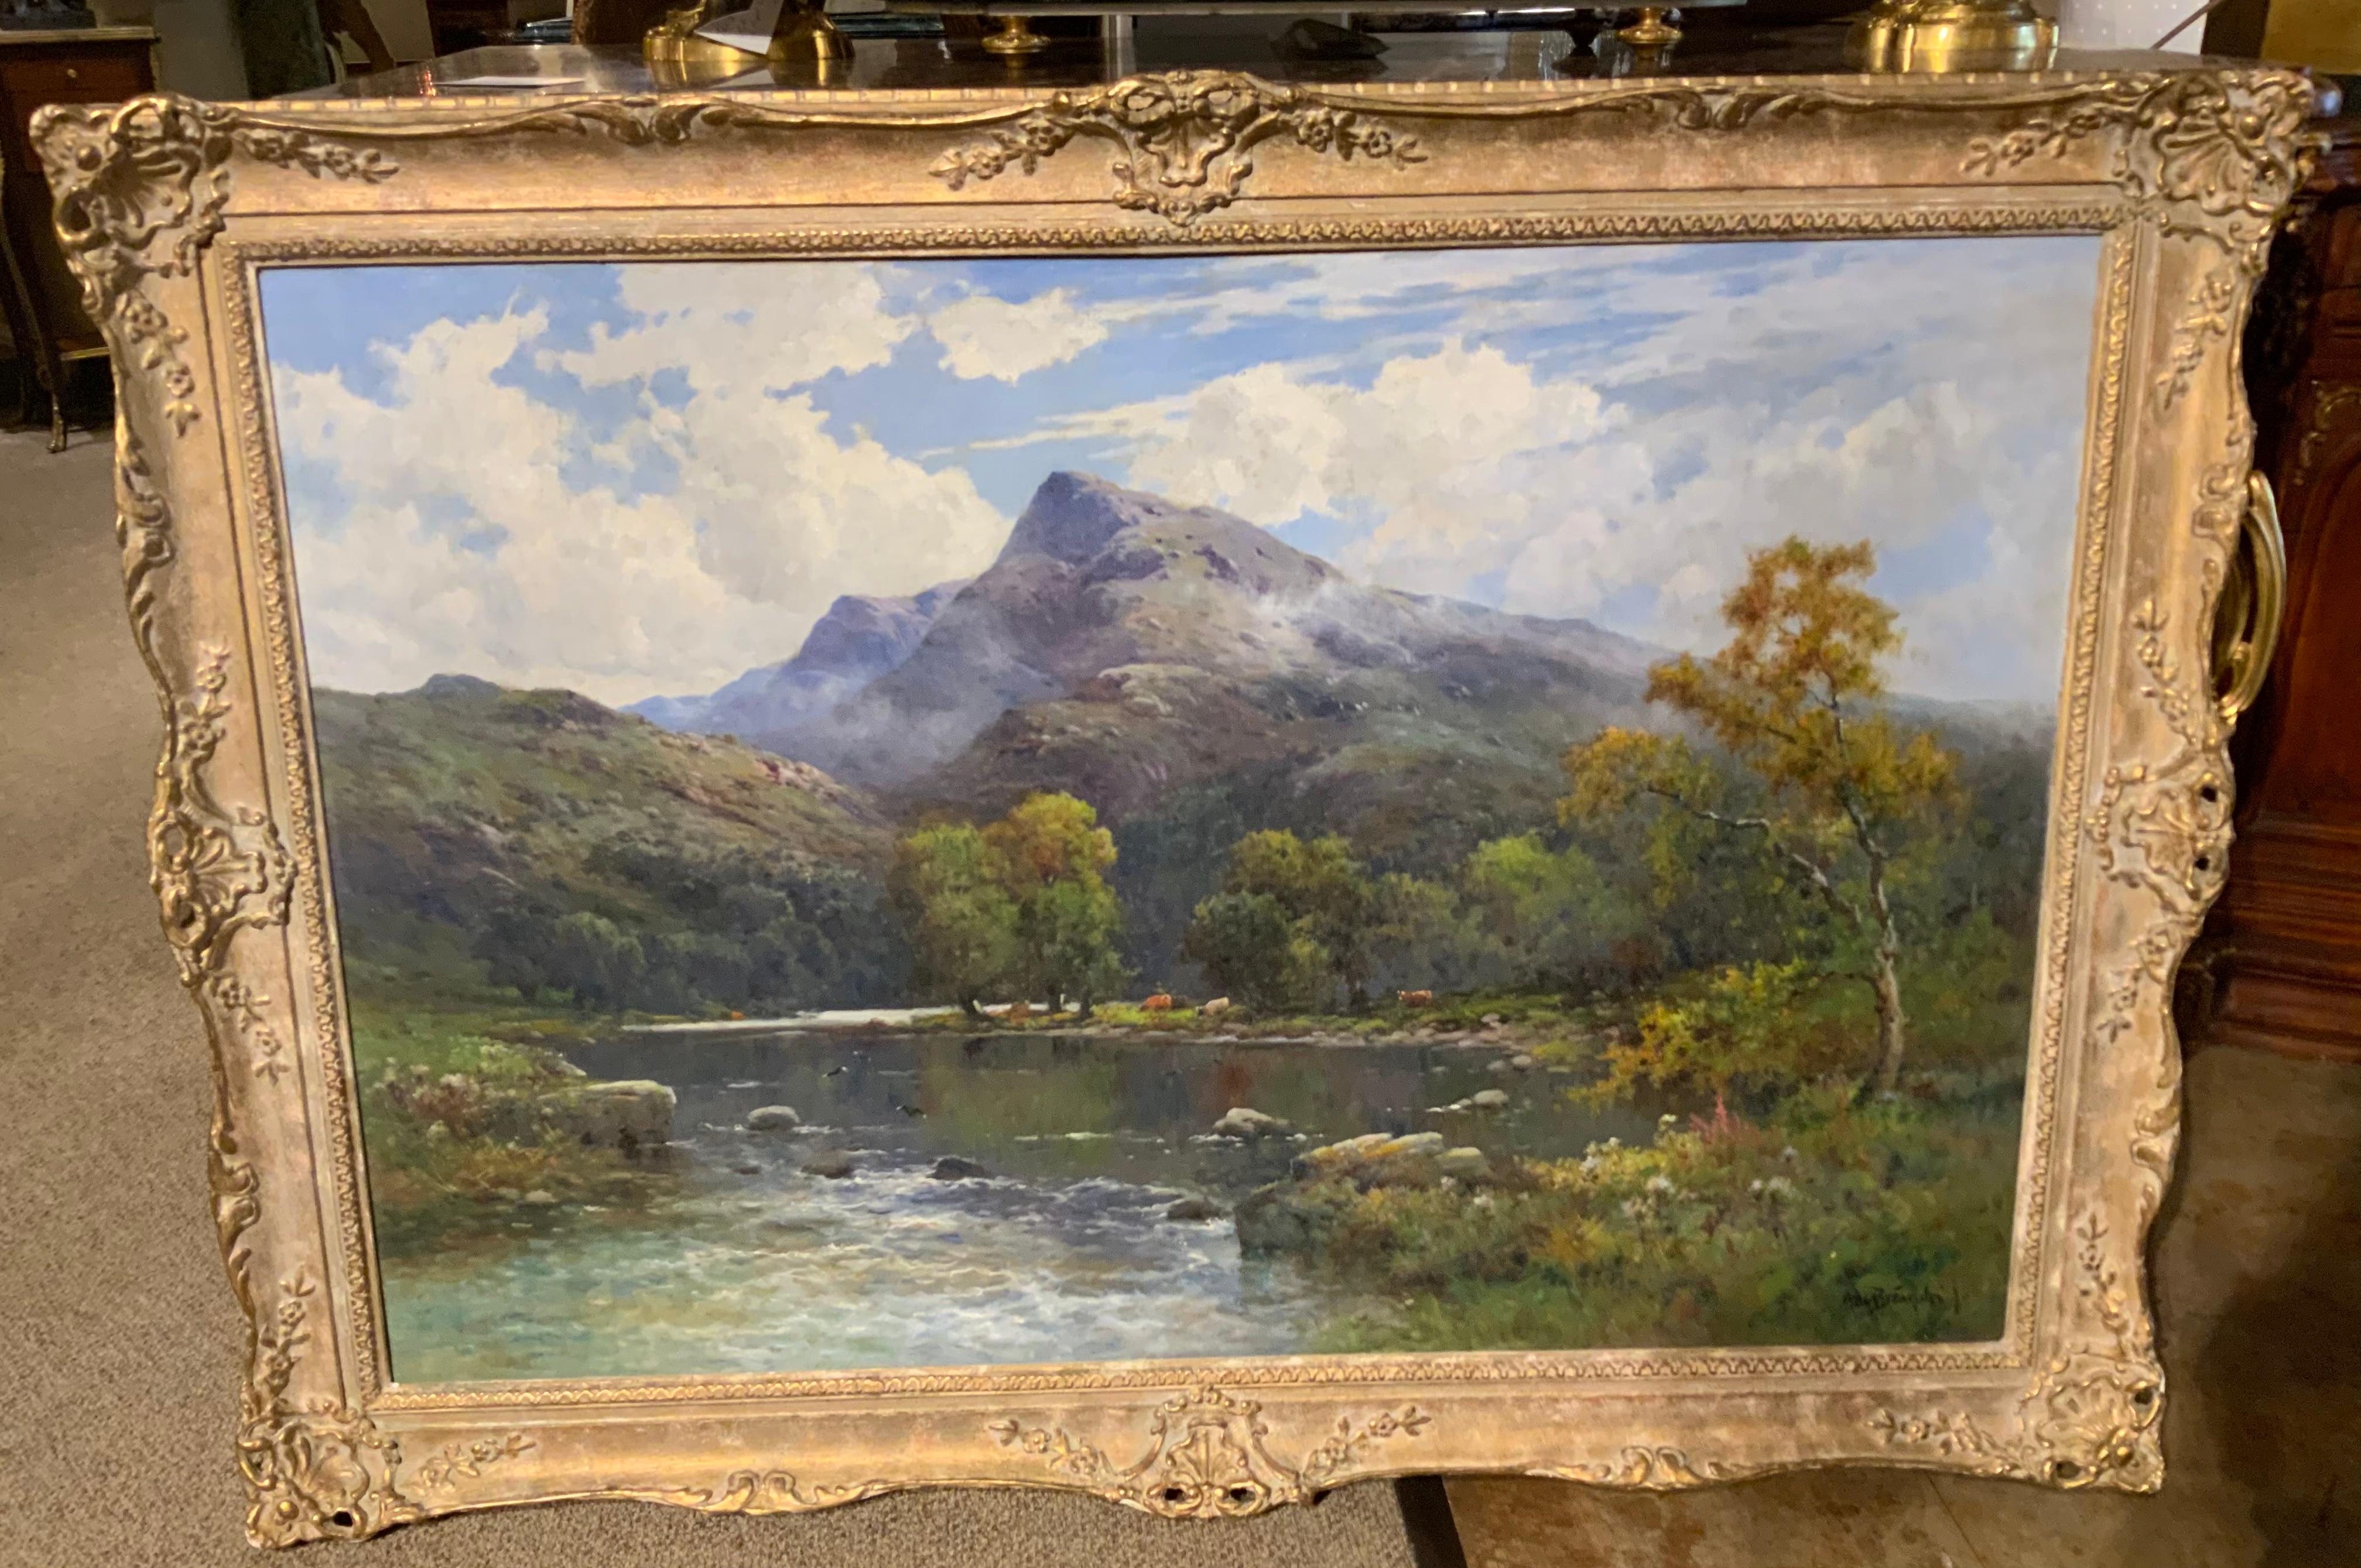 The unique use of color in subtle shades of blue make this
Painting beautiful and pleasing to the eye. It has great depth
Which draws interest deep into the surrounding landscape
Which depicts a river with mountains and at the center cattle.
“In